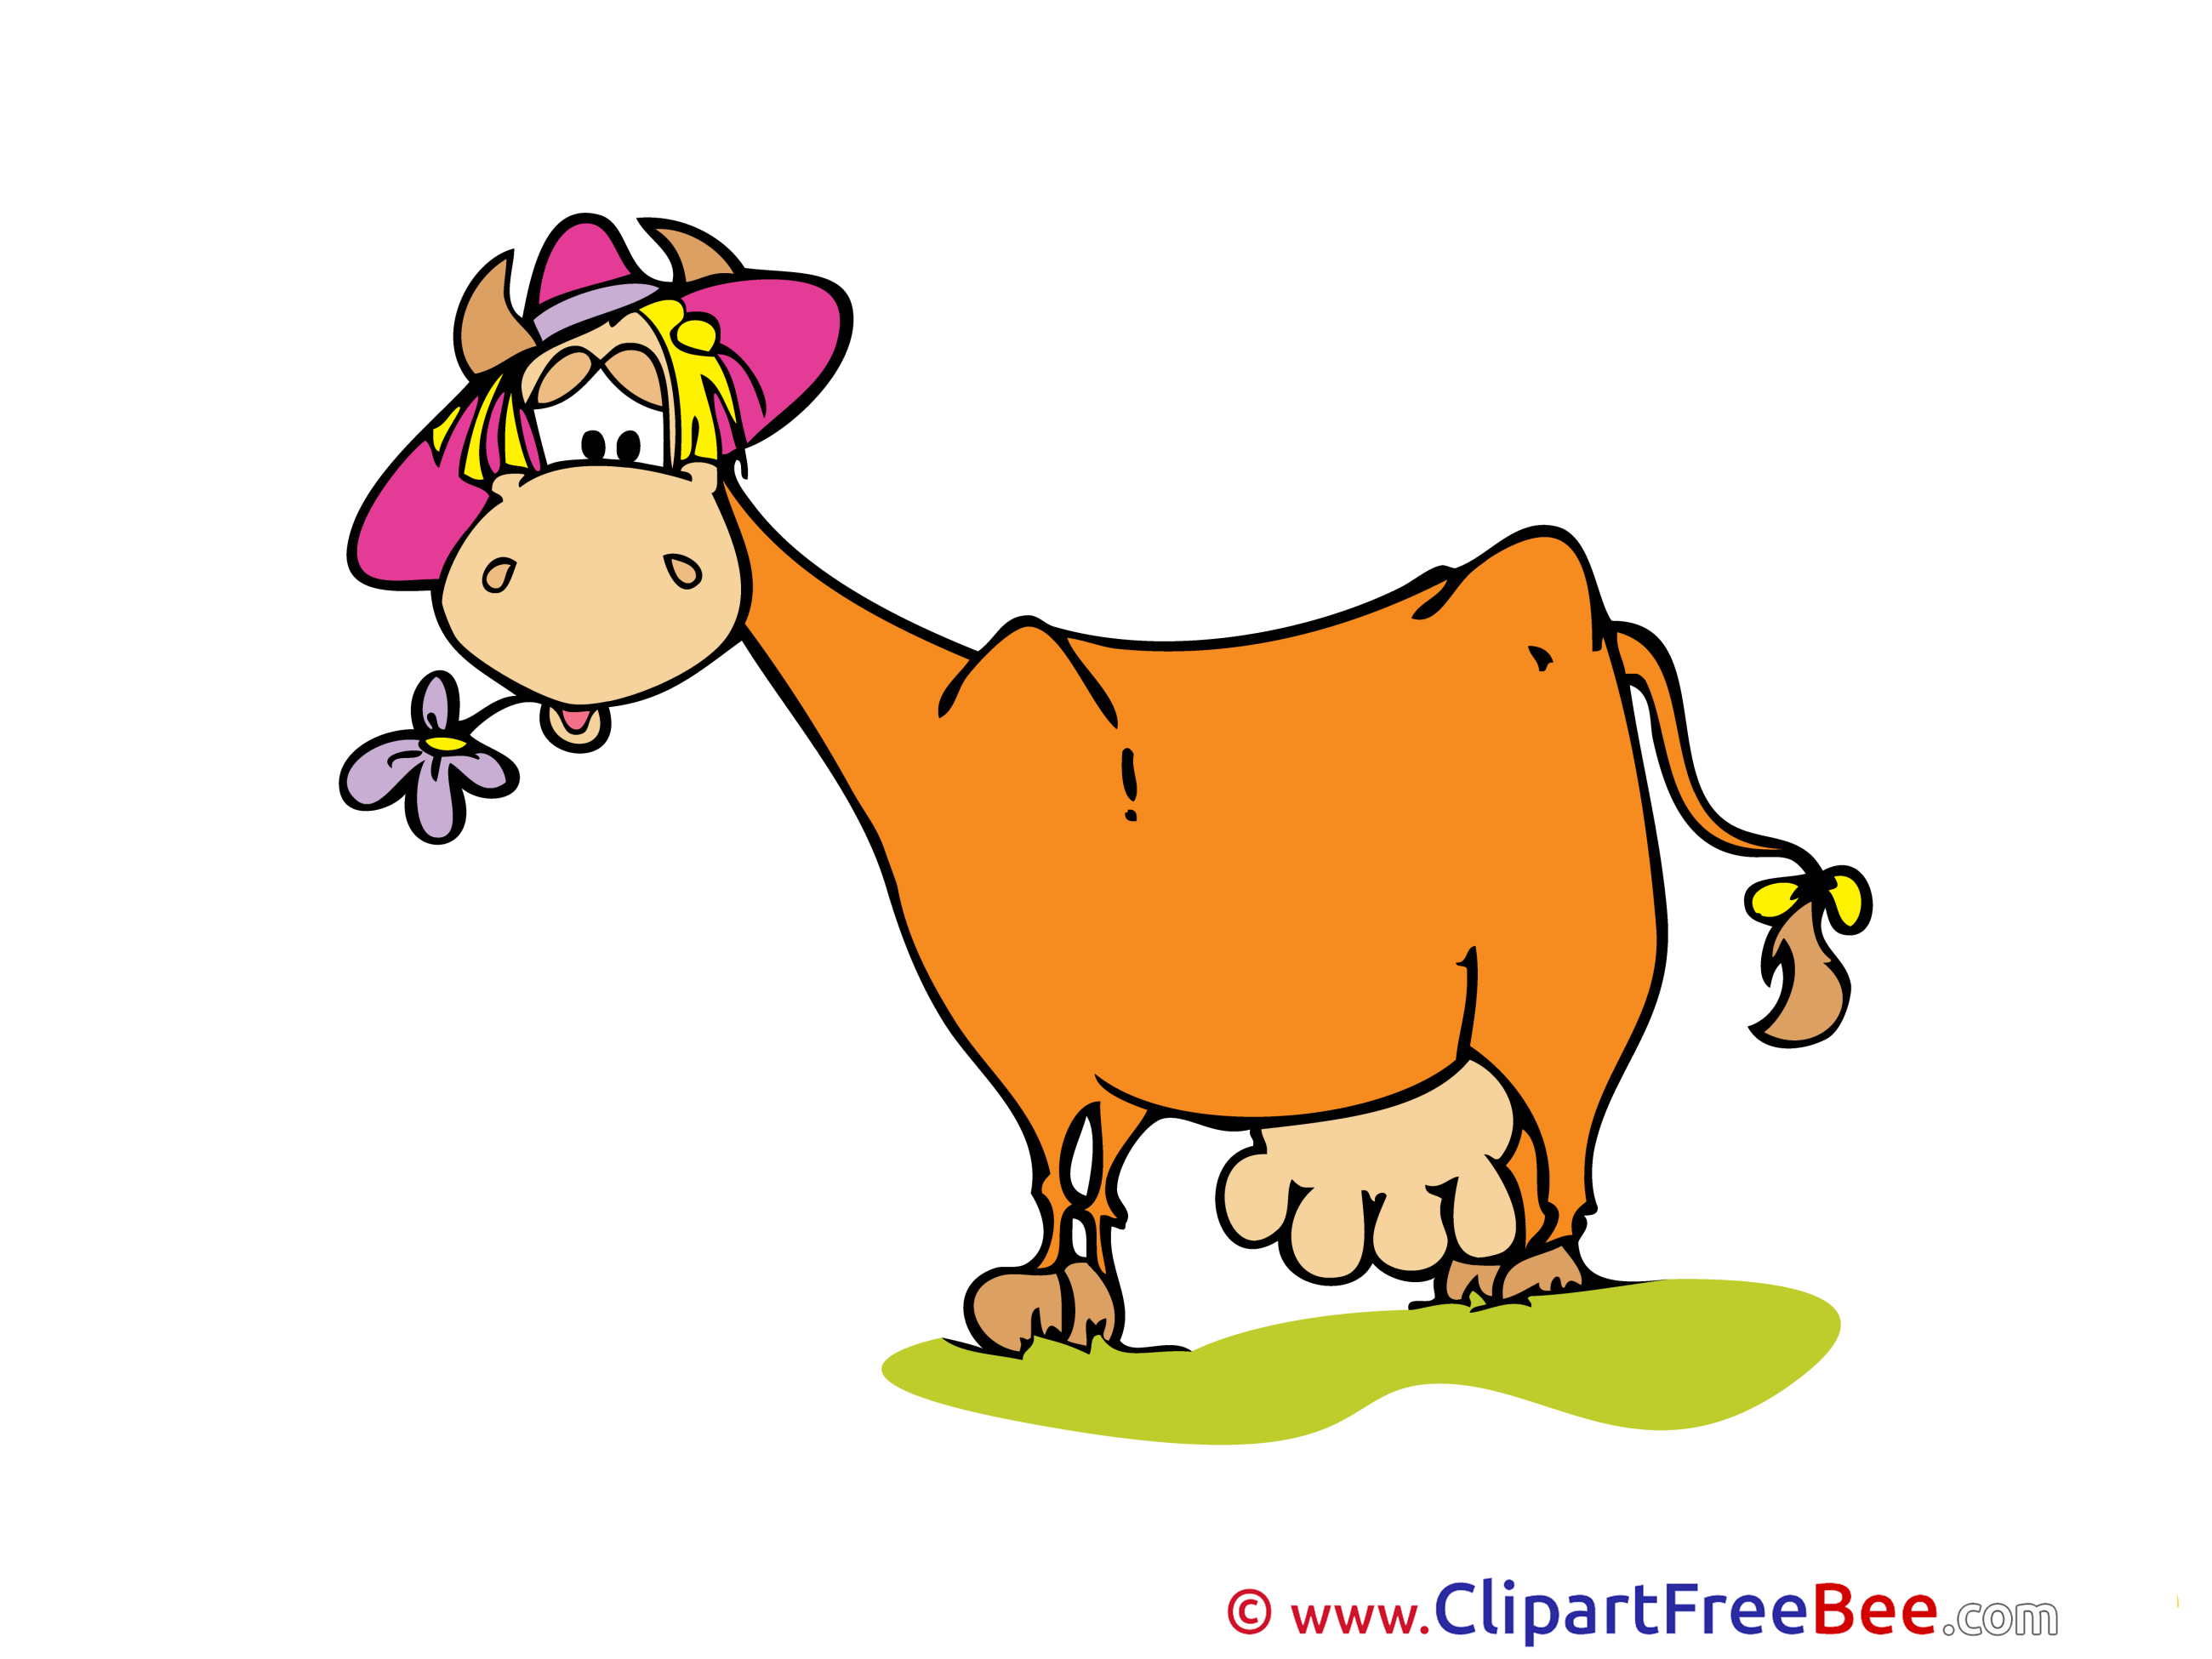 Flower Cow free printable Cliparts and Images